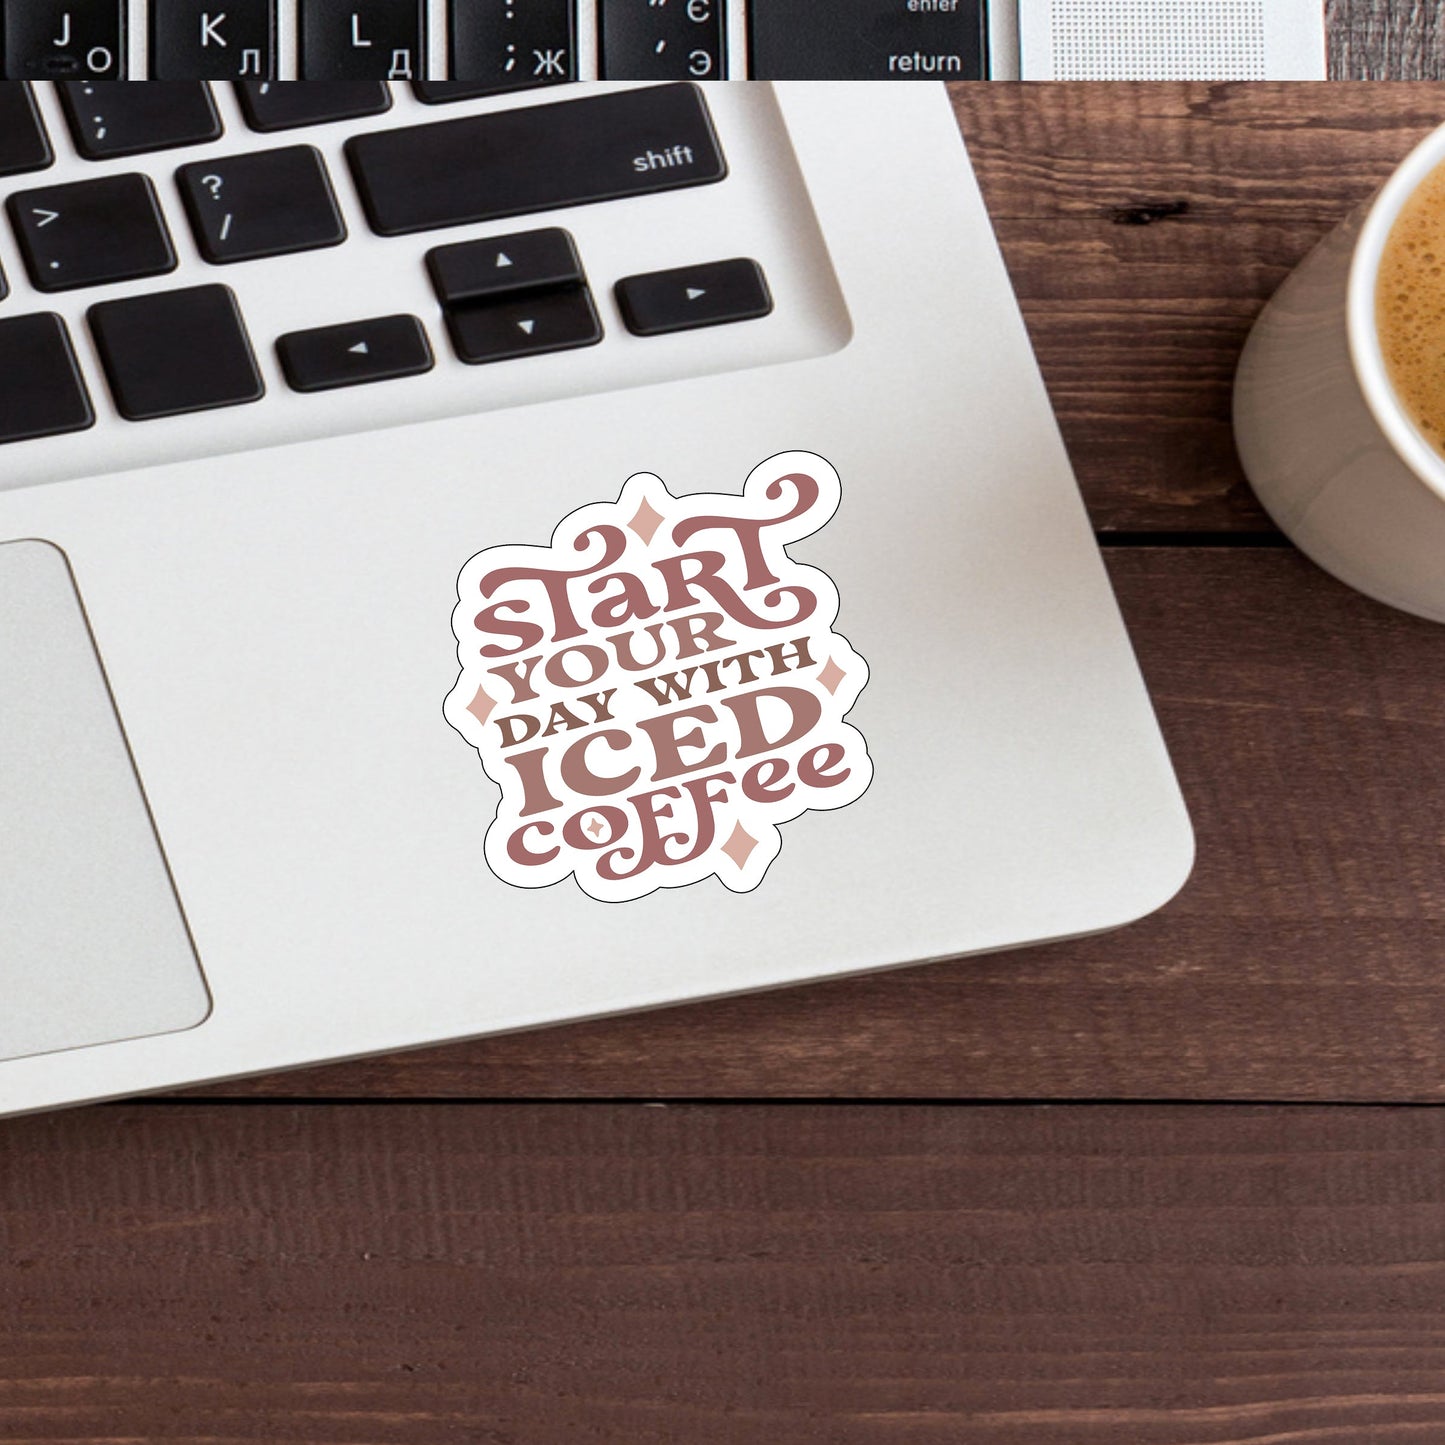 Start your day with iced coffee  Sticker,  Vinyl sticker, laptop sticker, Tablet sticker